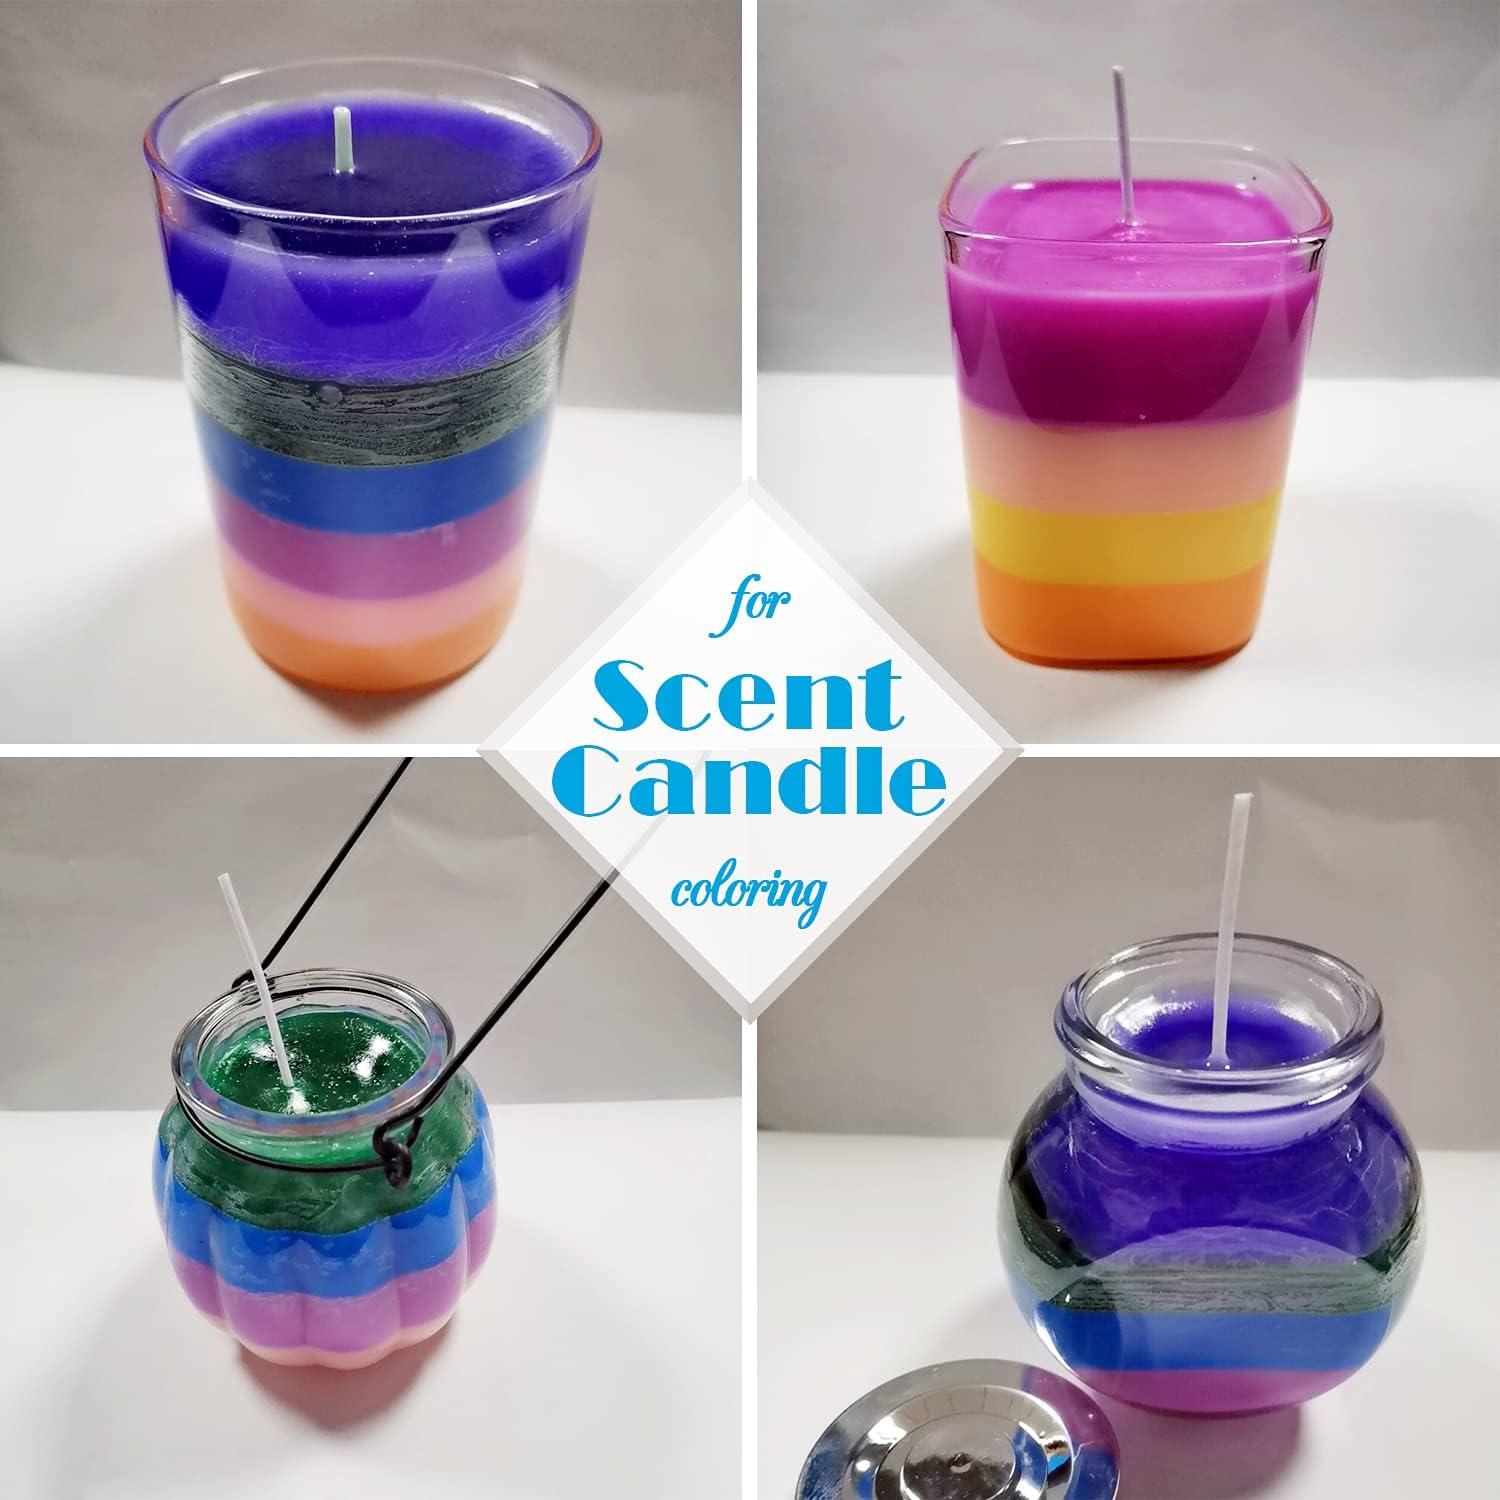 10ml Candle Dye Leakproof Highly Concentrated Aromatherapy Color Essence  Soap Toning Pigment Soy Wax Paraffin Dye Colorant for Home 